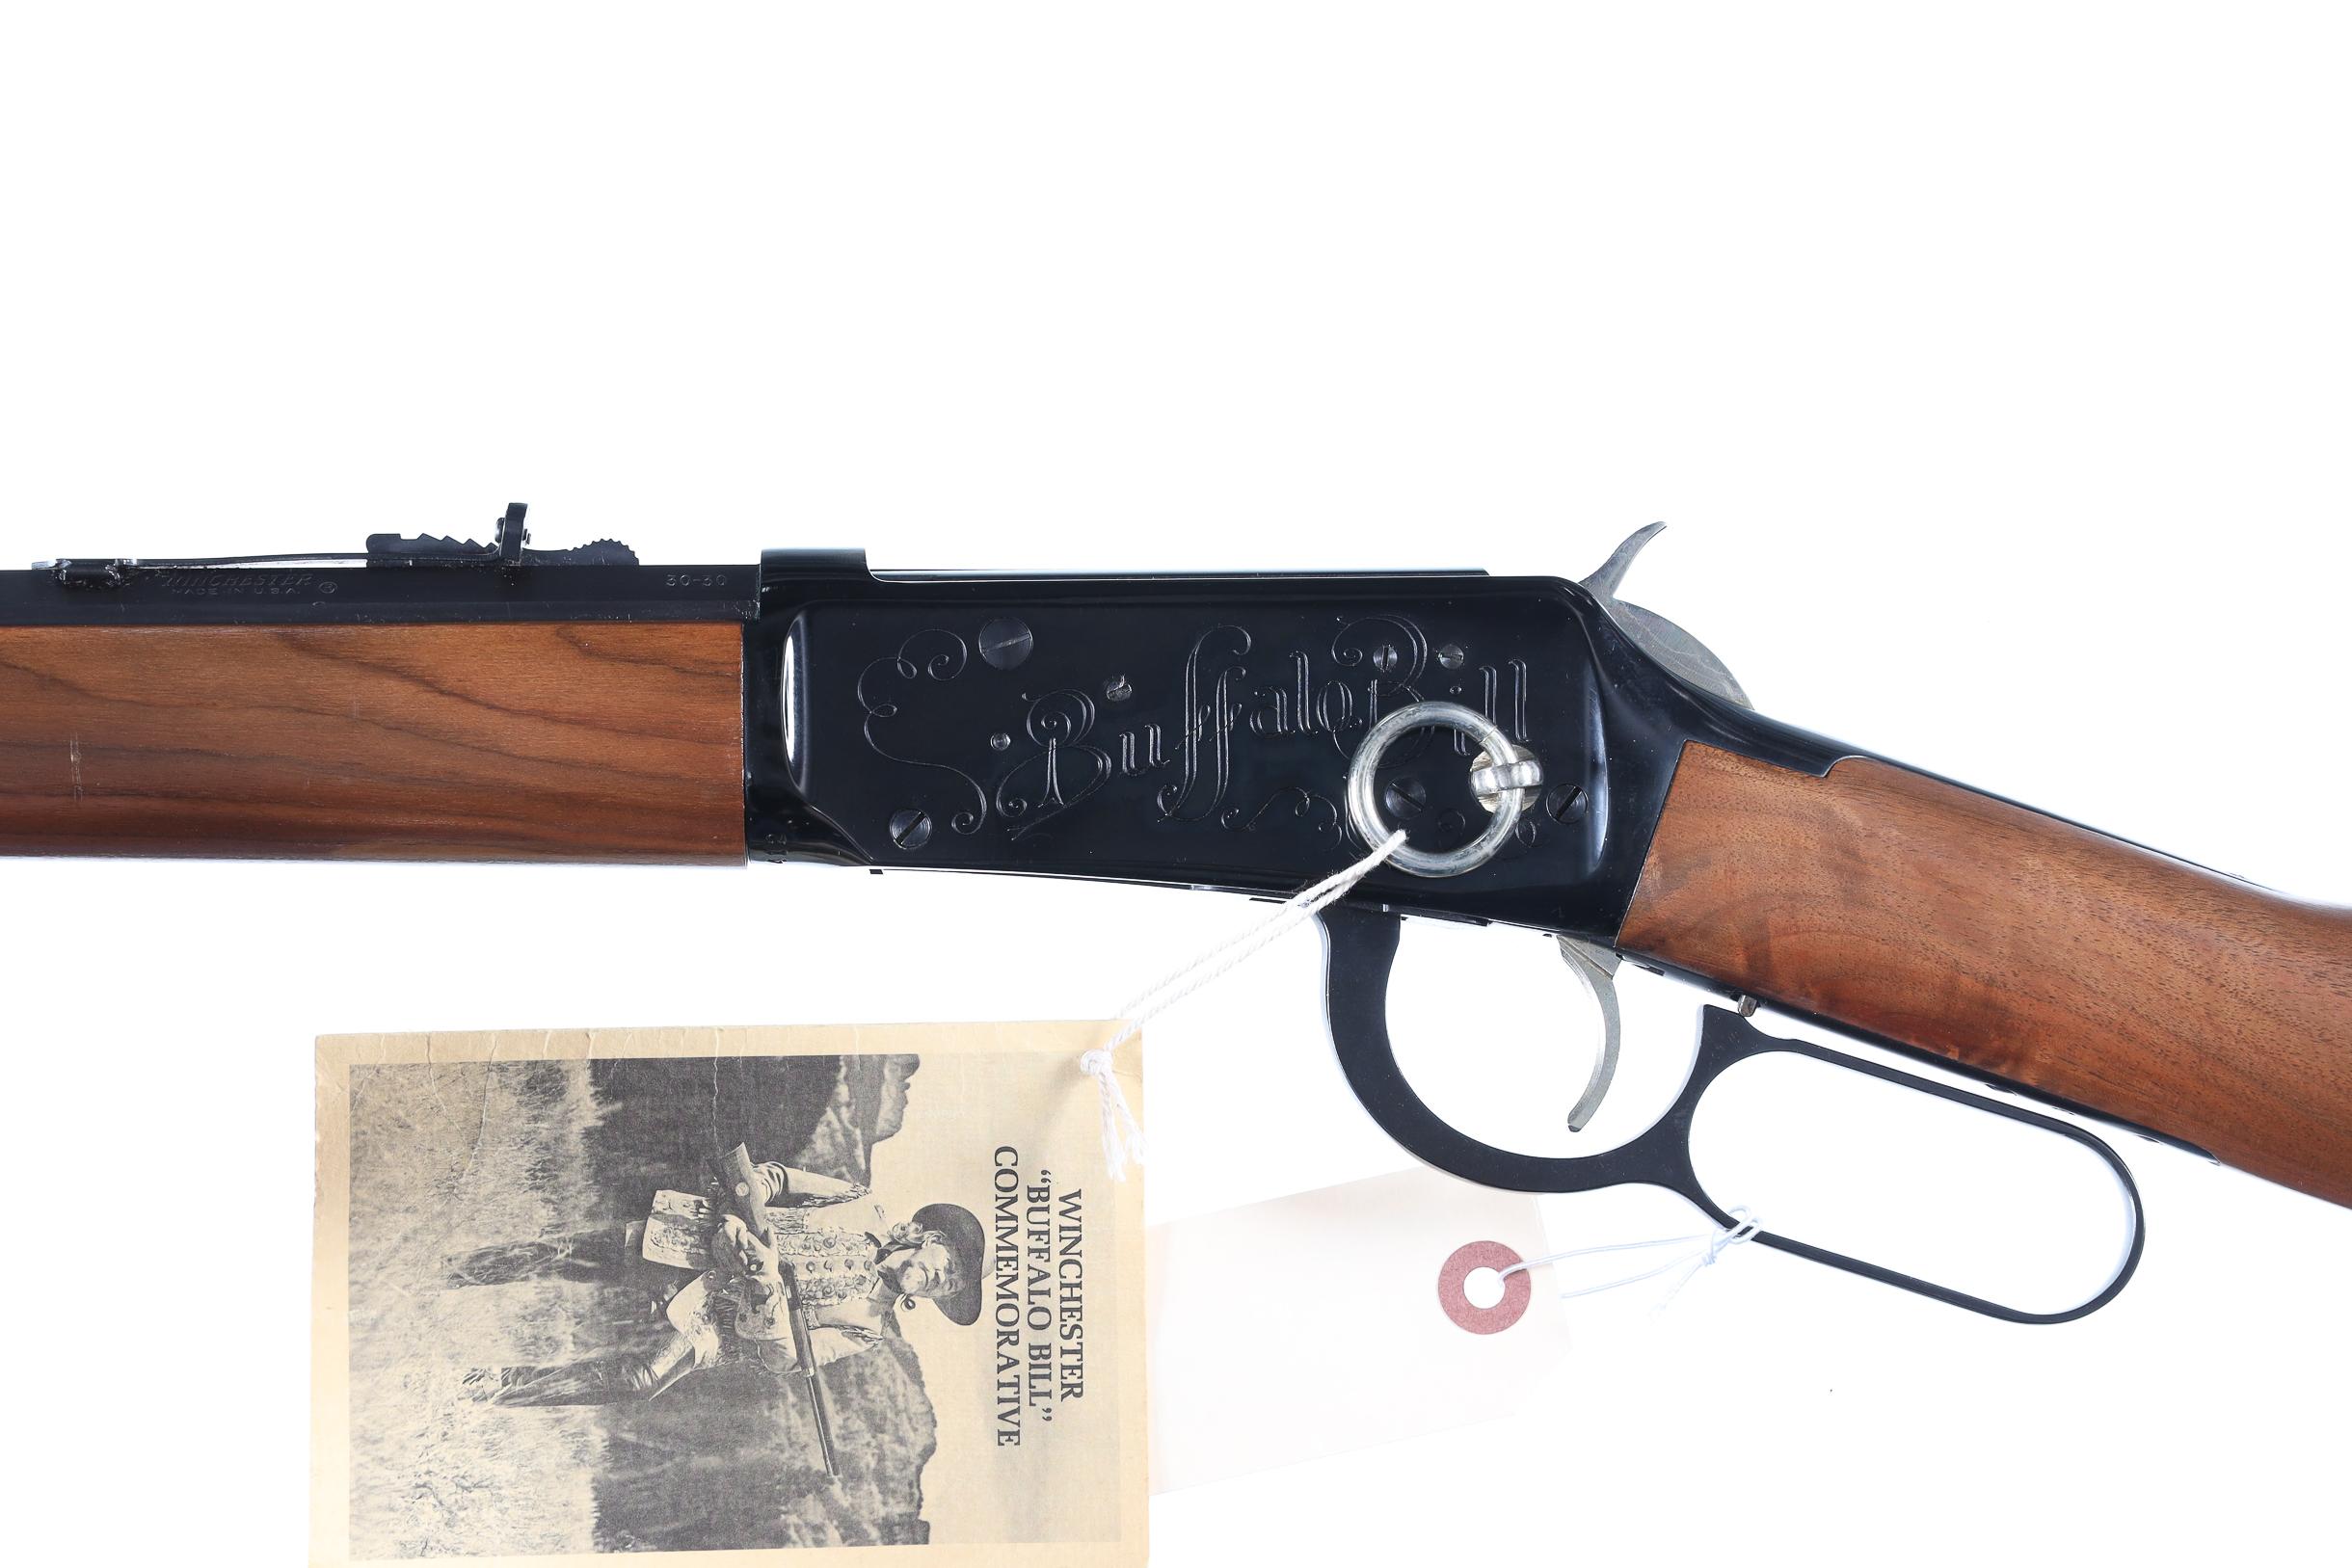 Winchester 94 Lever Rifle 30-30